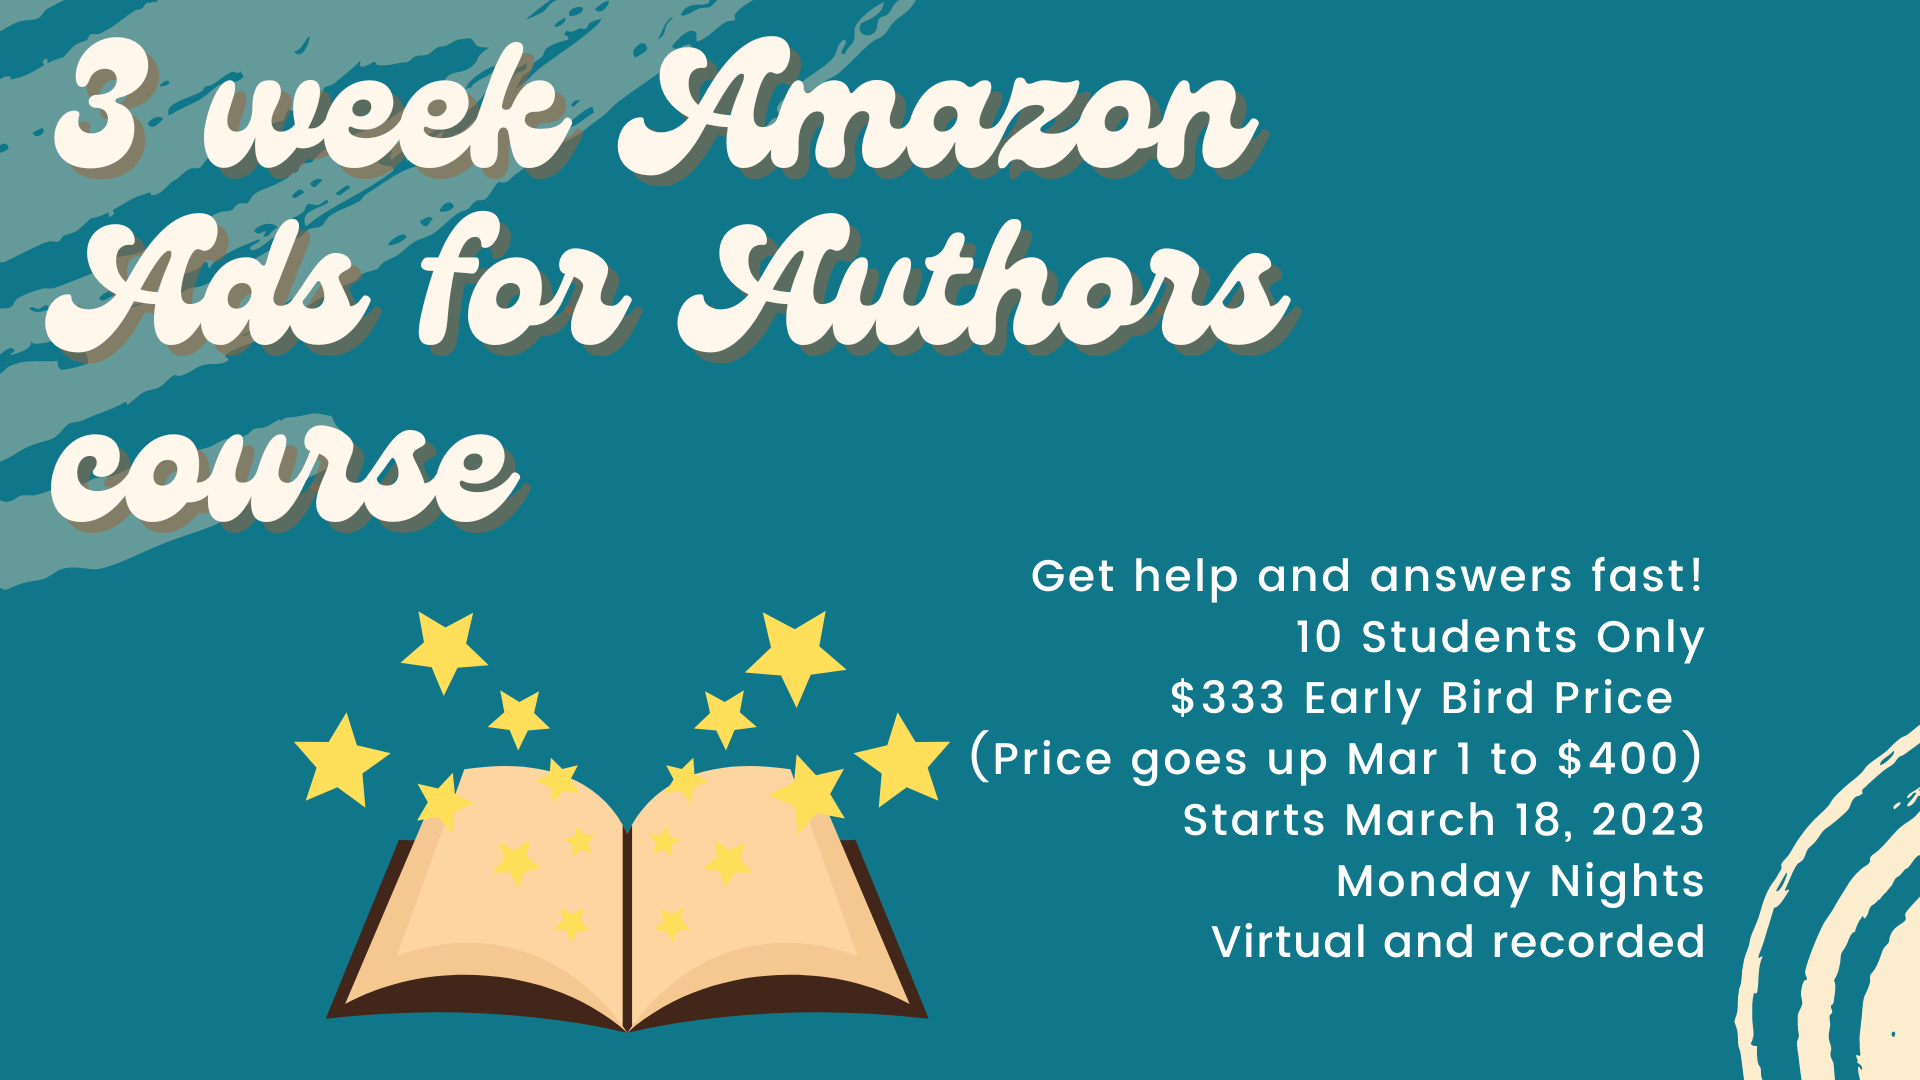 Amazon Ads Class for Authors